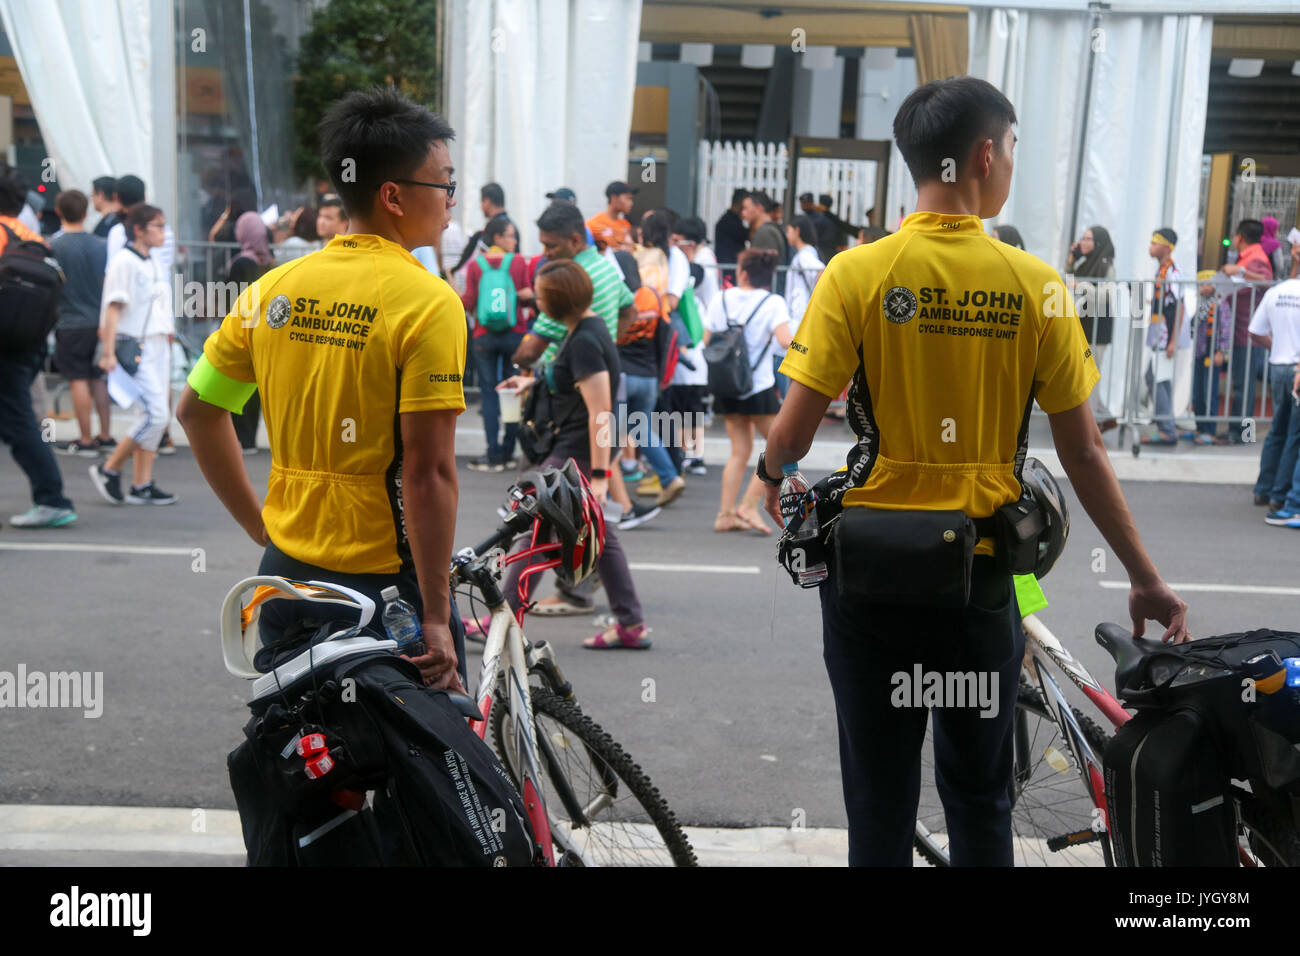 St. John Ambulance personnels on bicycle on duty during the opening ceremony of 29th SEA games. Credit: Calvin Chan/Alamy Live News Stock Photo